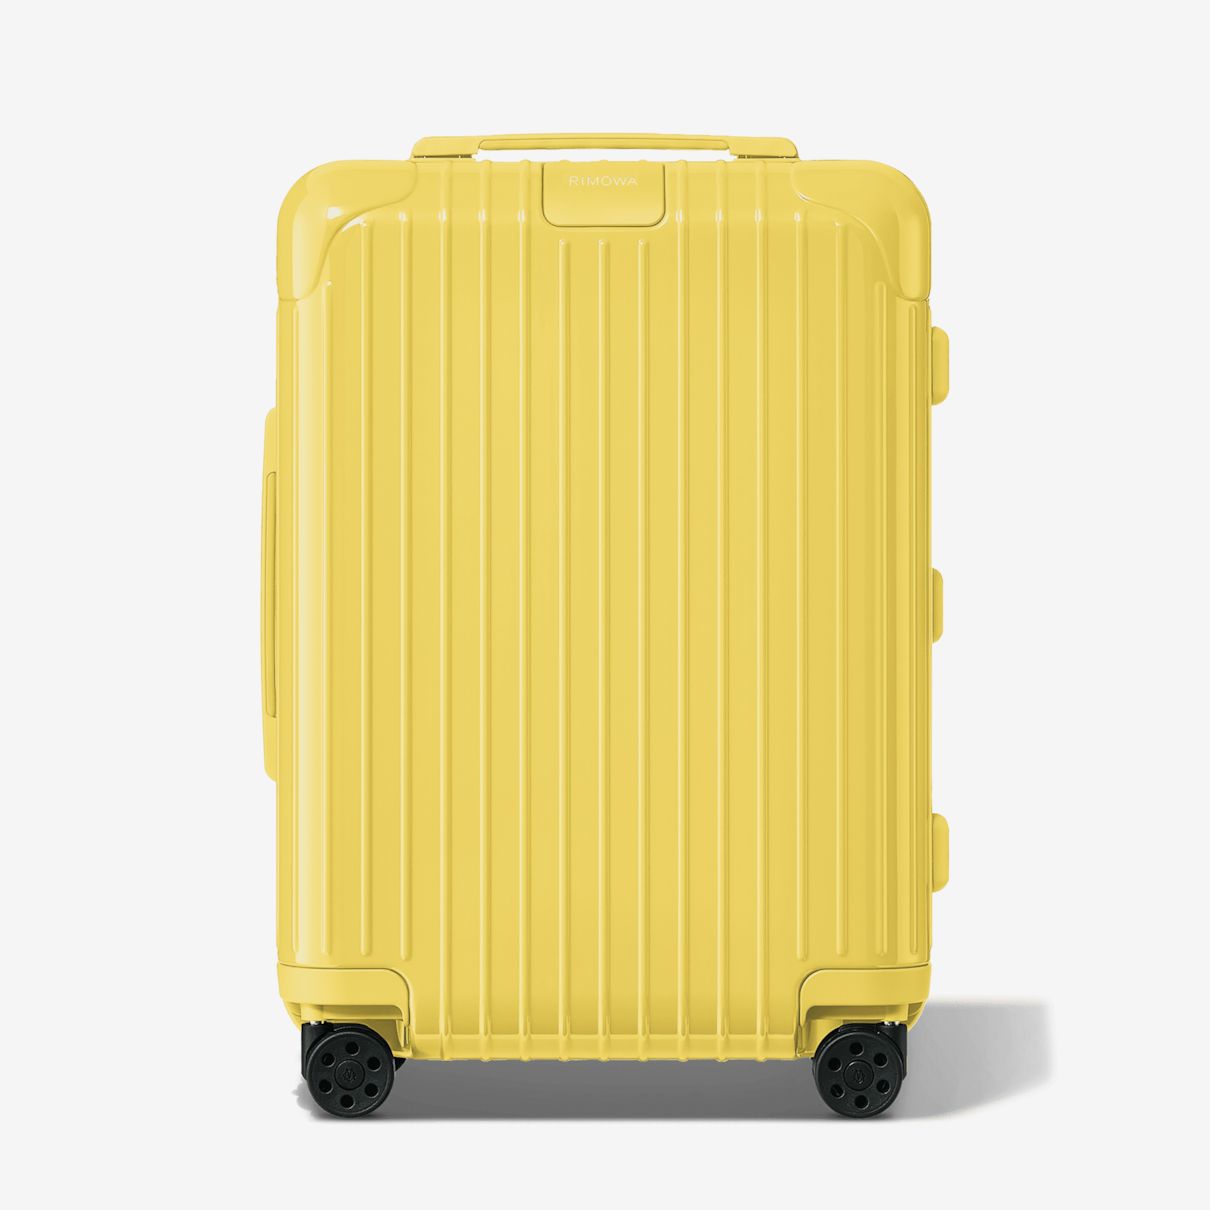 The Best Carry-On Luggage We've Tested So Far